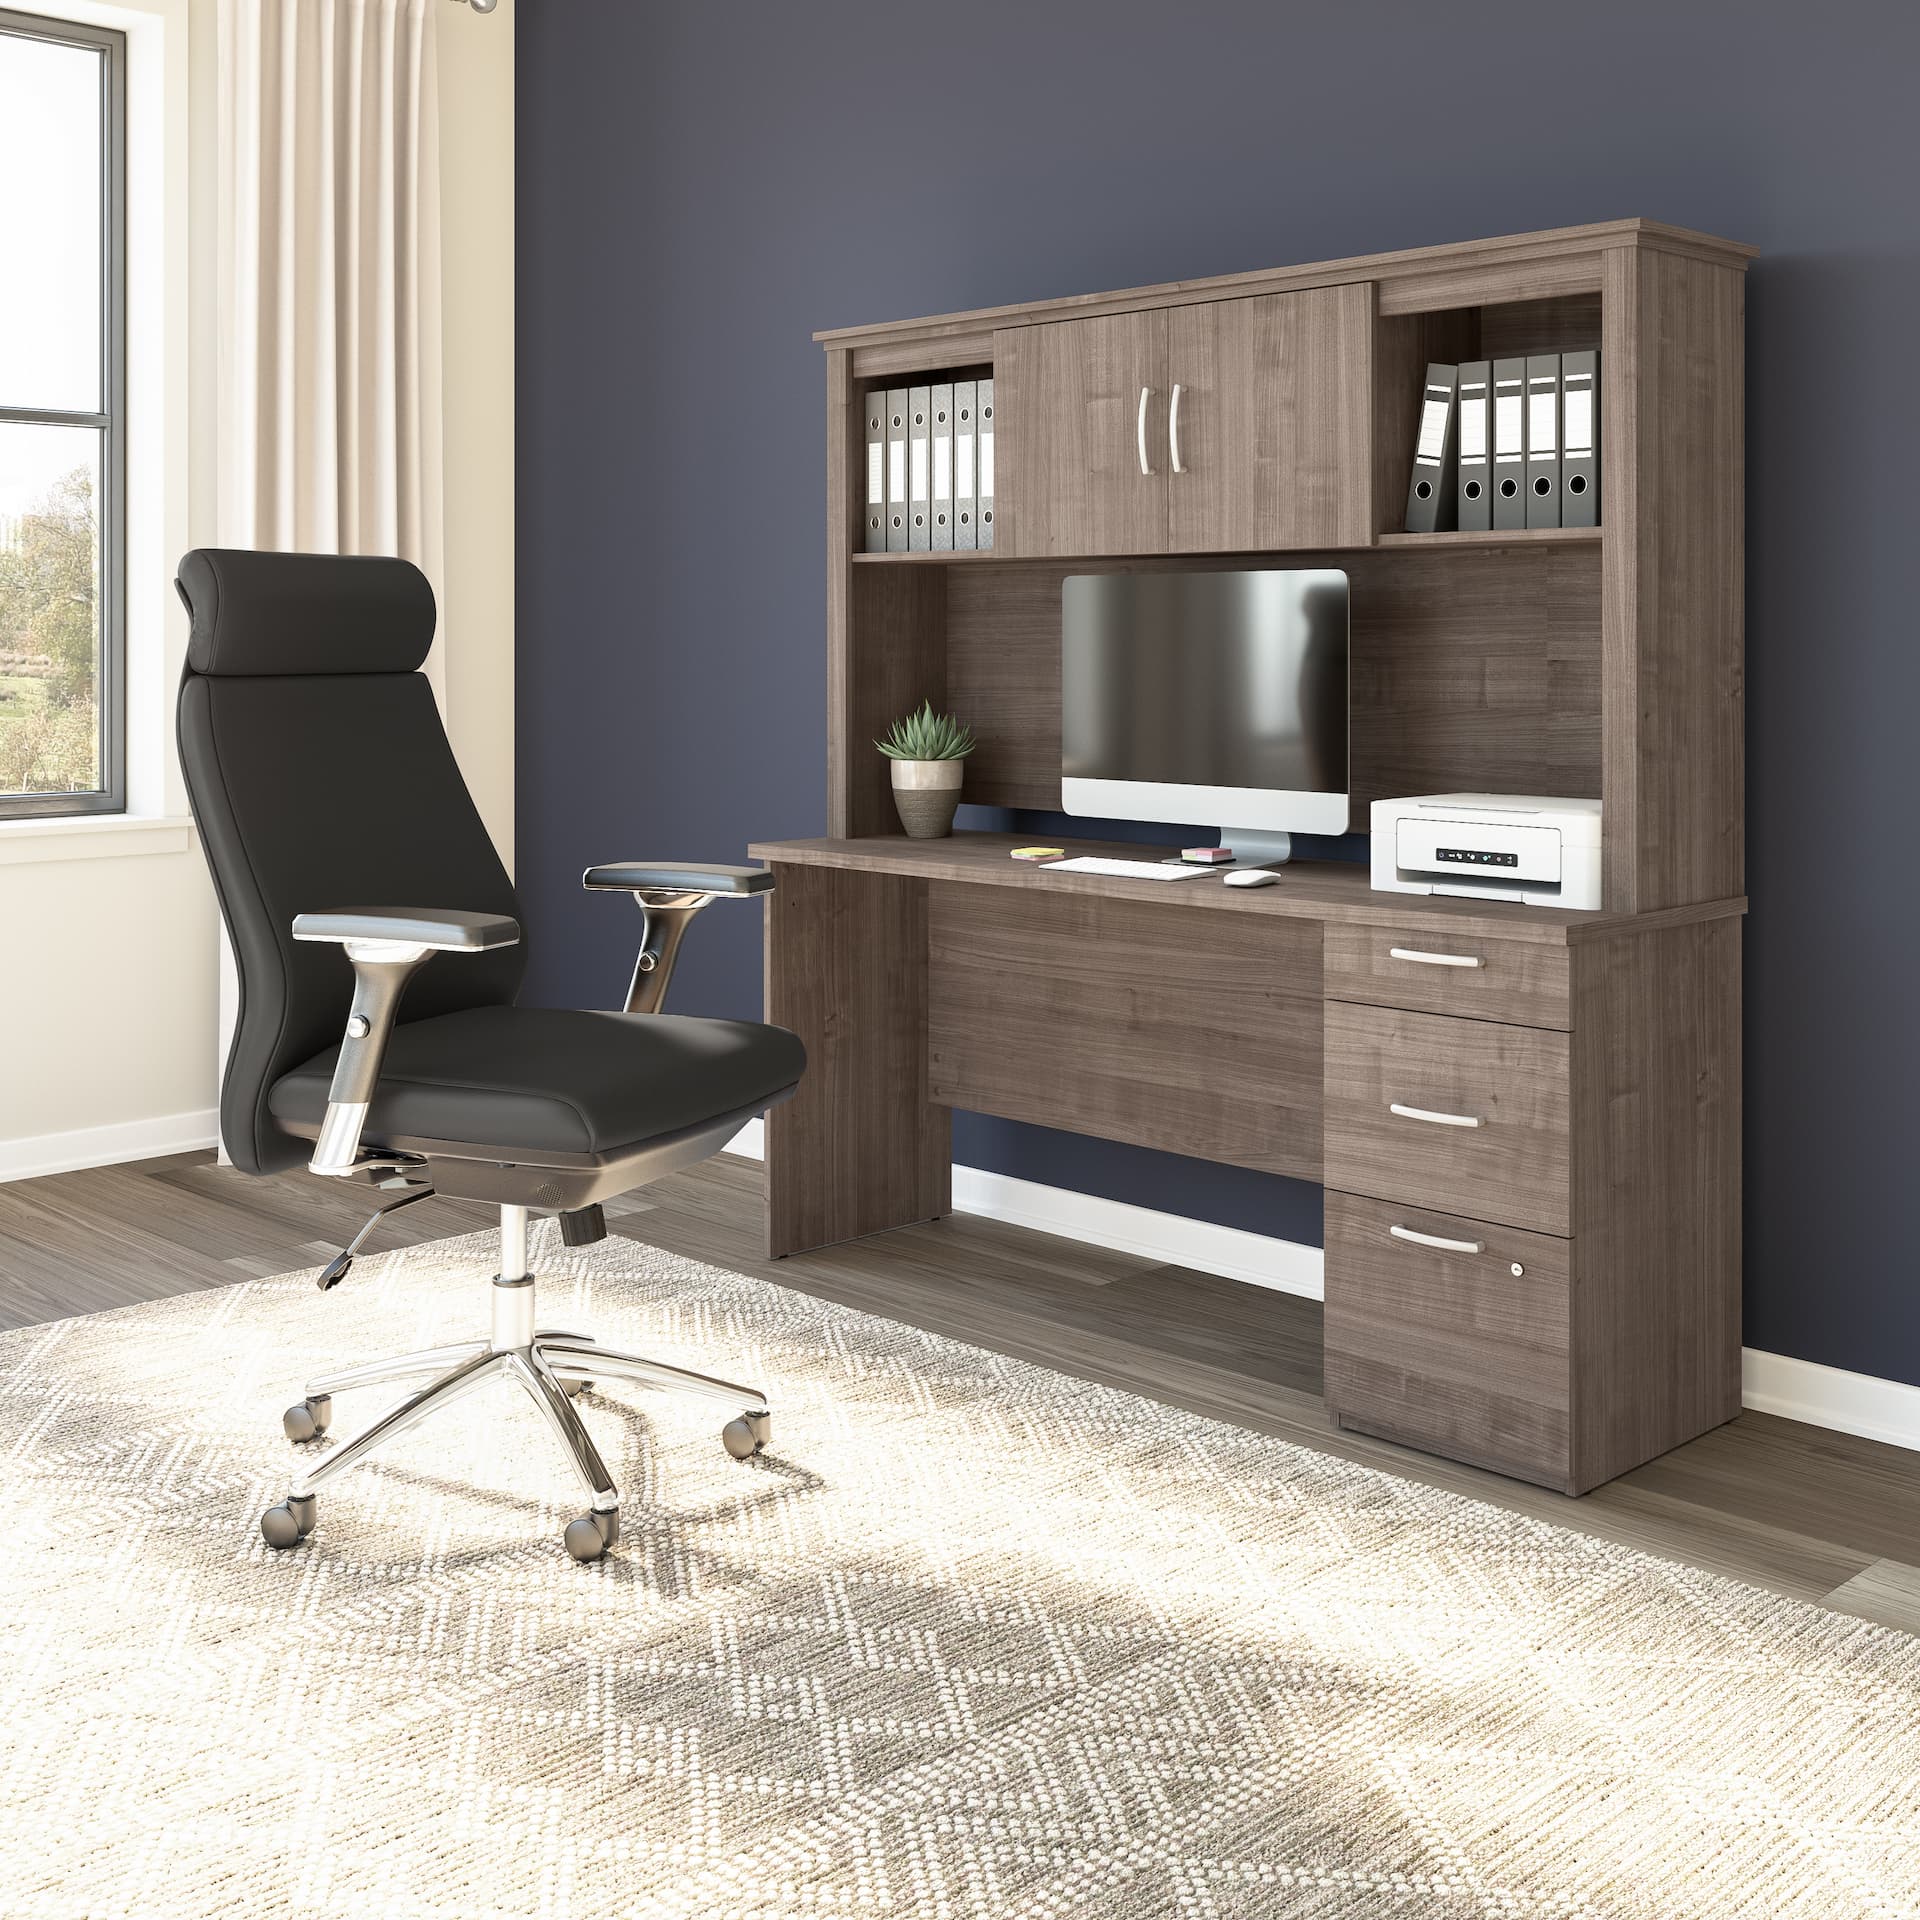 Organizational furniture for any workspace